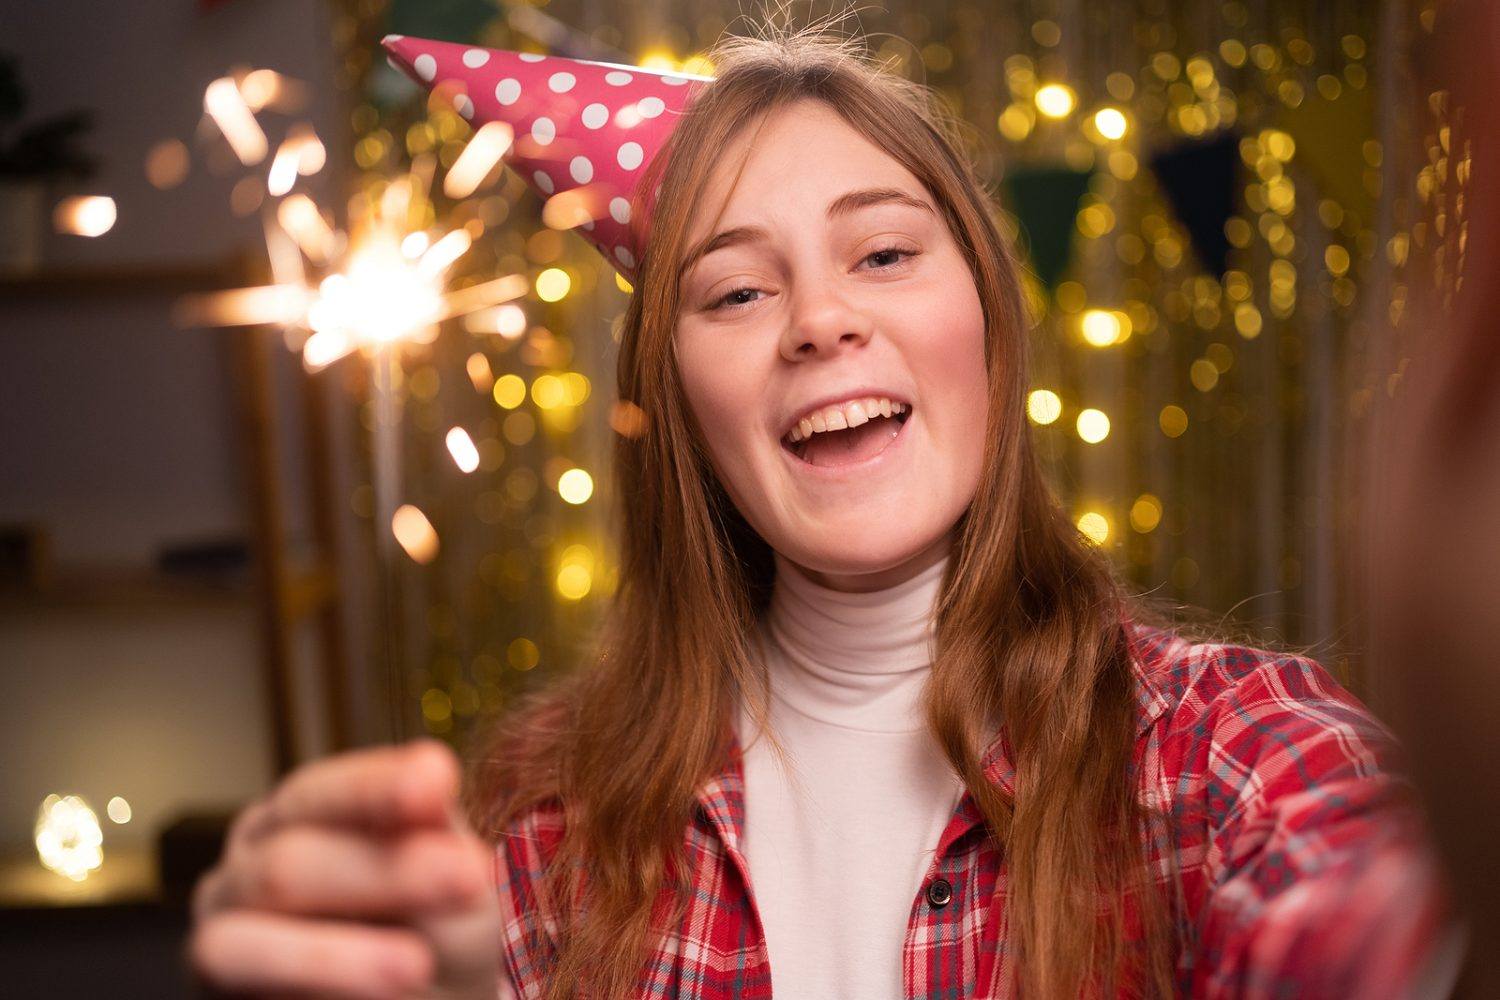 Girl With Sparkler Lights On Her Birthday While Celebrate At Hom